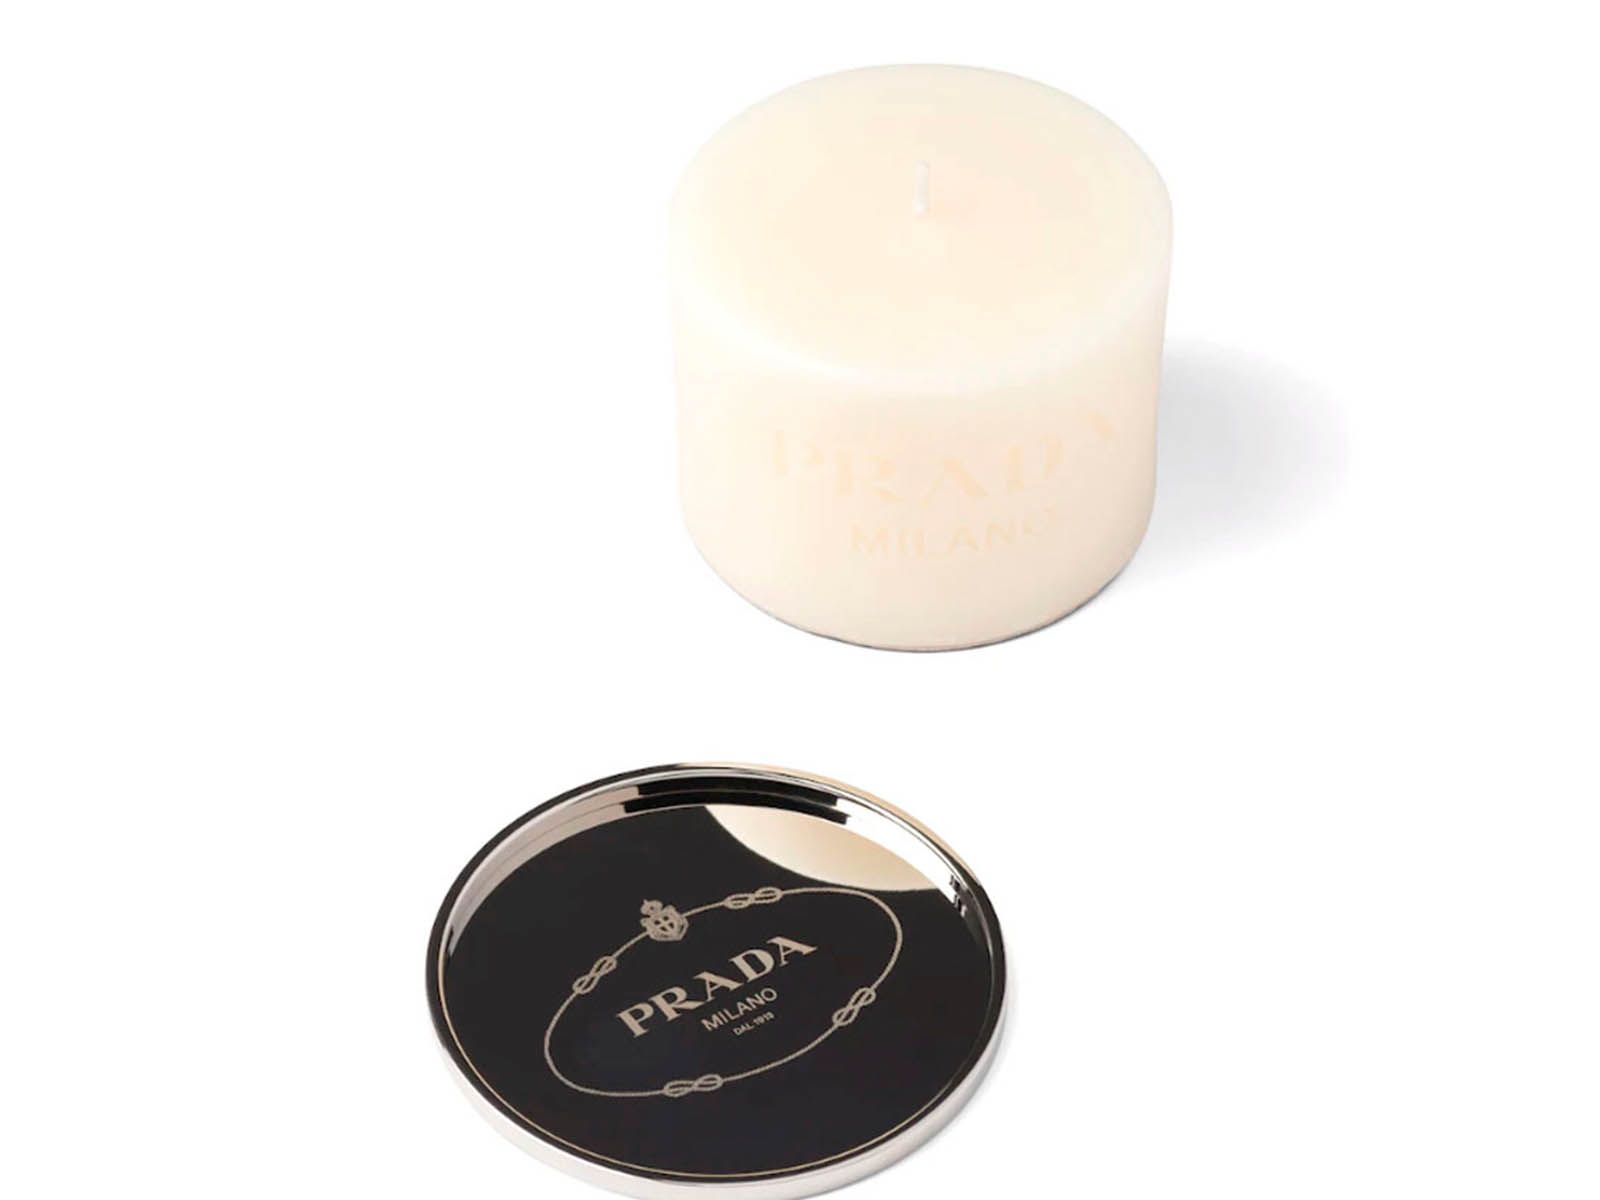 Prada designs a candle with its essence in its DNA - HIGHXTAR.